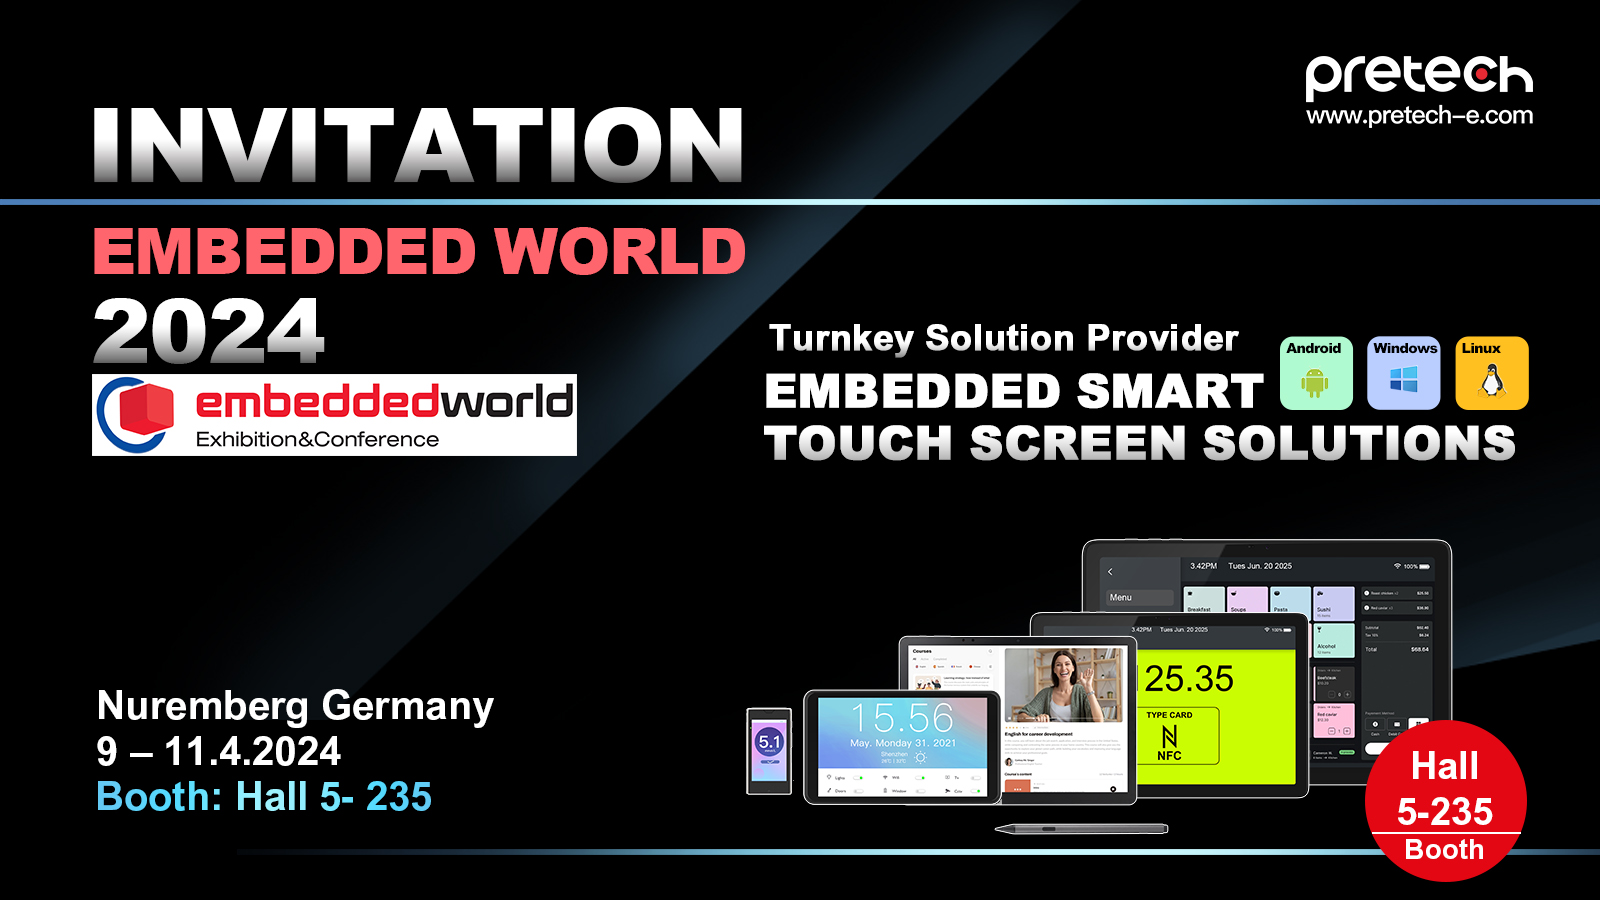 Invitation to Embedded World 2024 - Visit us at Booth No. Hall 5-235